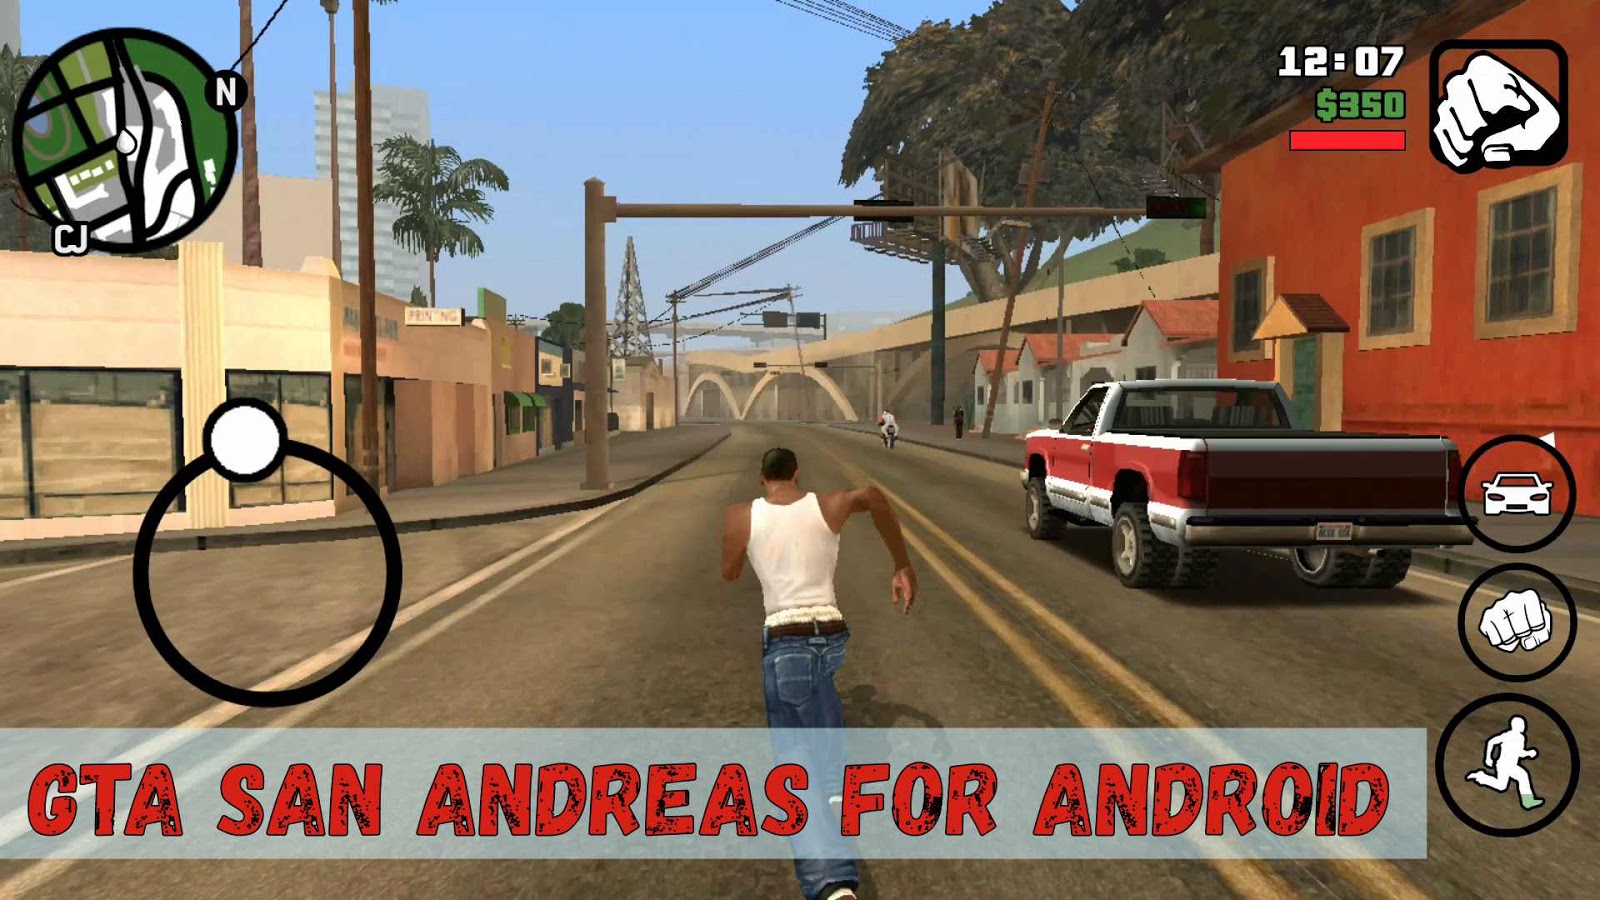 Gta san andreas 5 for android фото 69